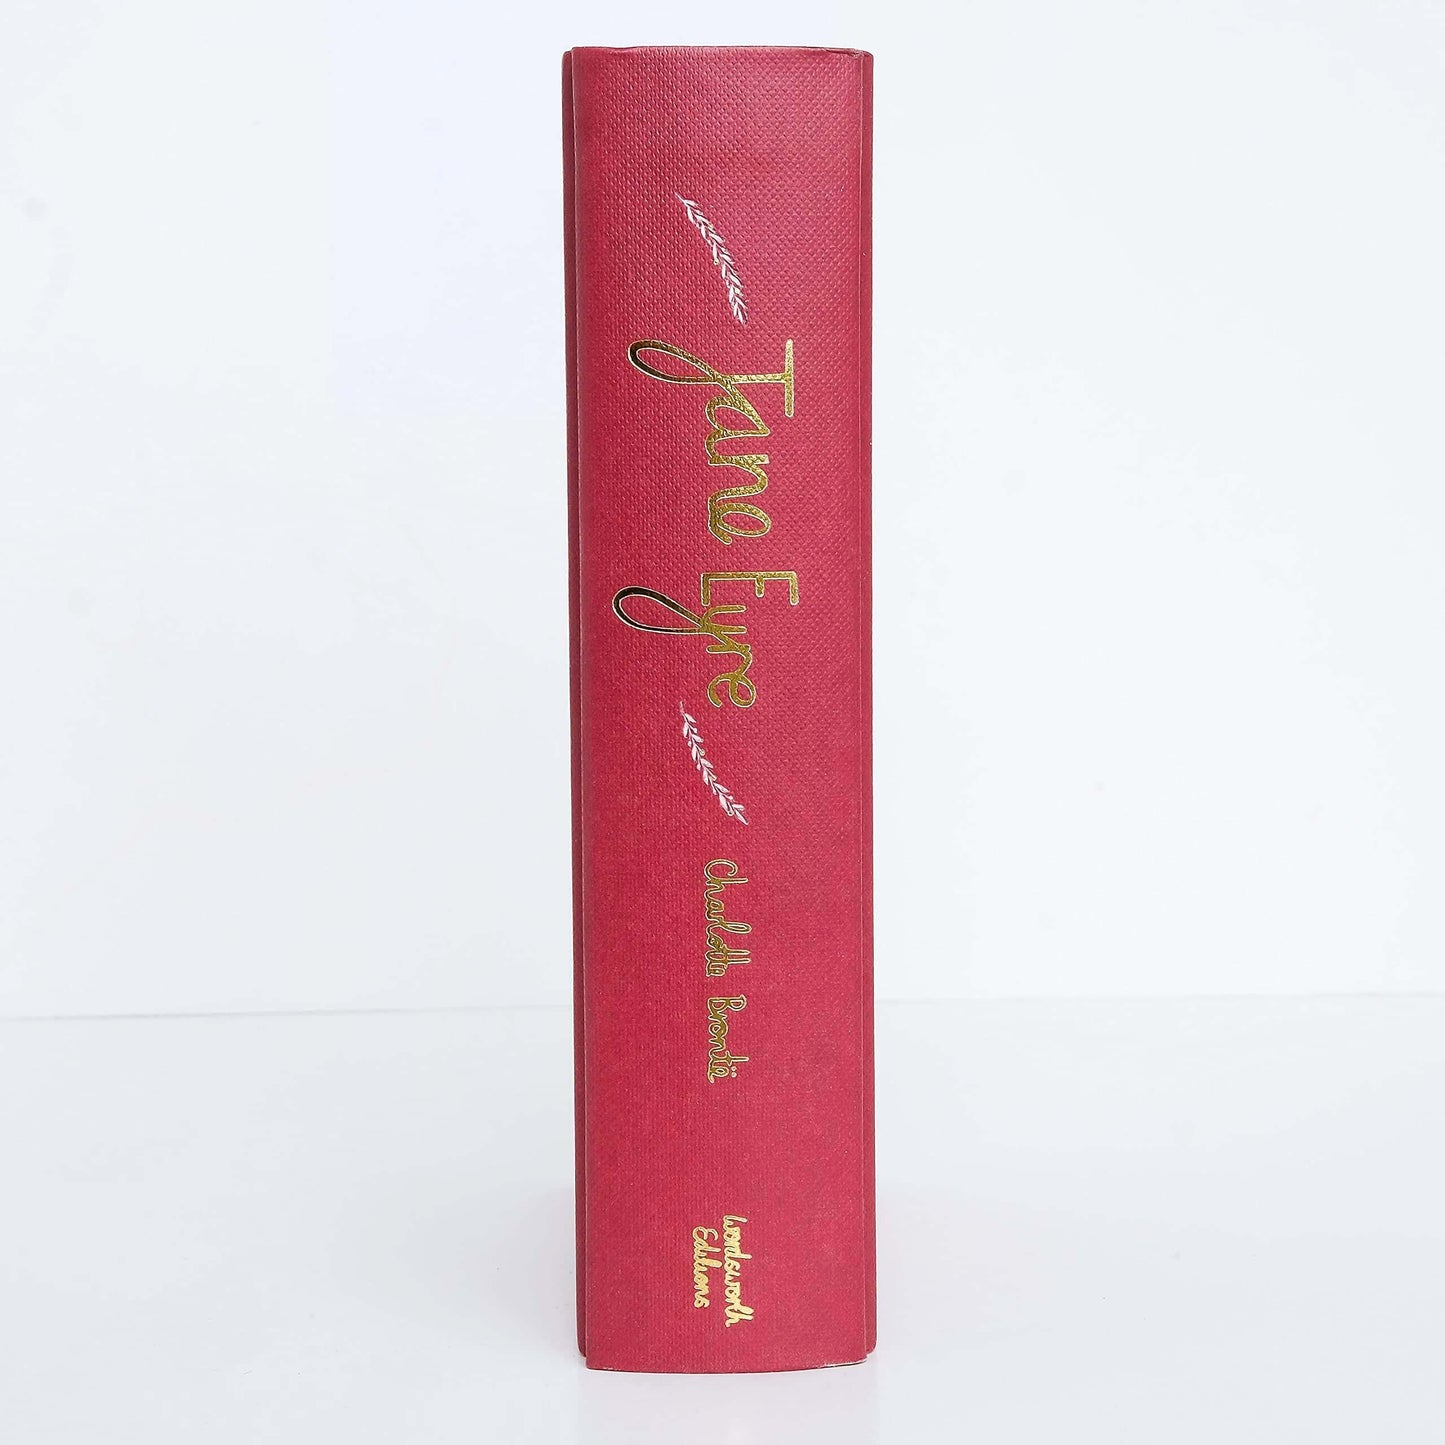 Jane Eyre by Charlotte Bronte - Wordsworth Collector's Edition